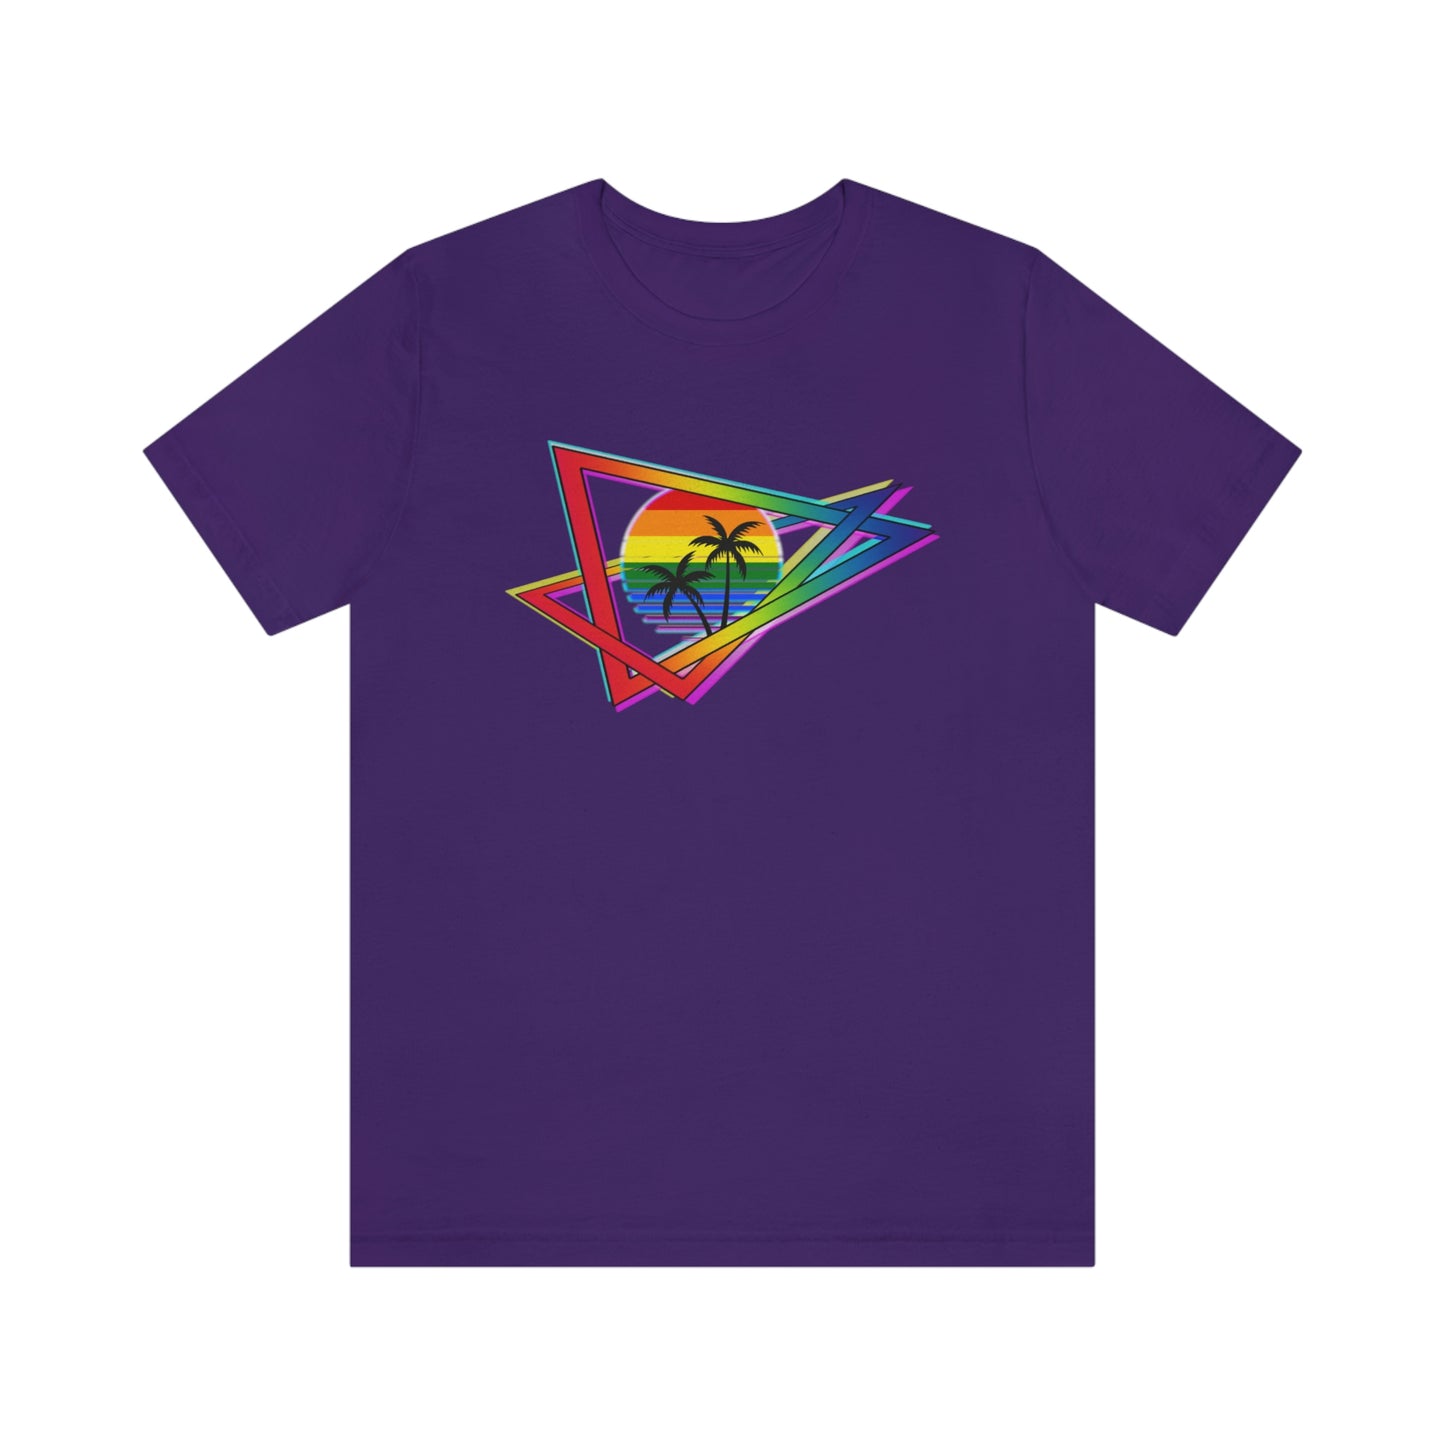 Outrun Style Rainbow Pride Shirt Lord and Lady Towers